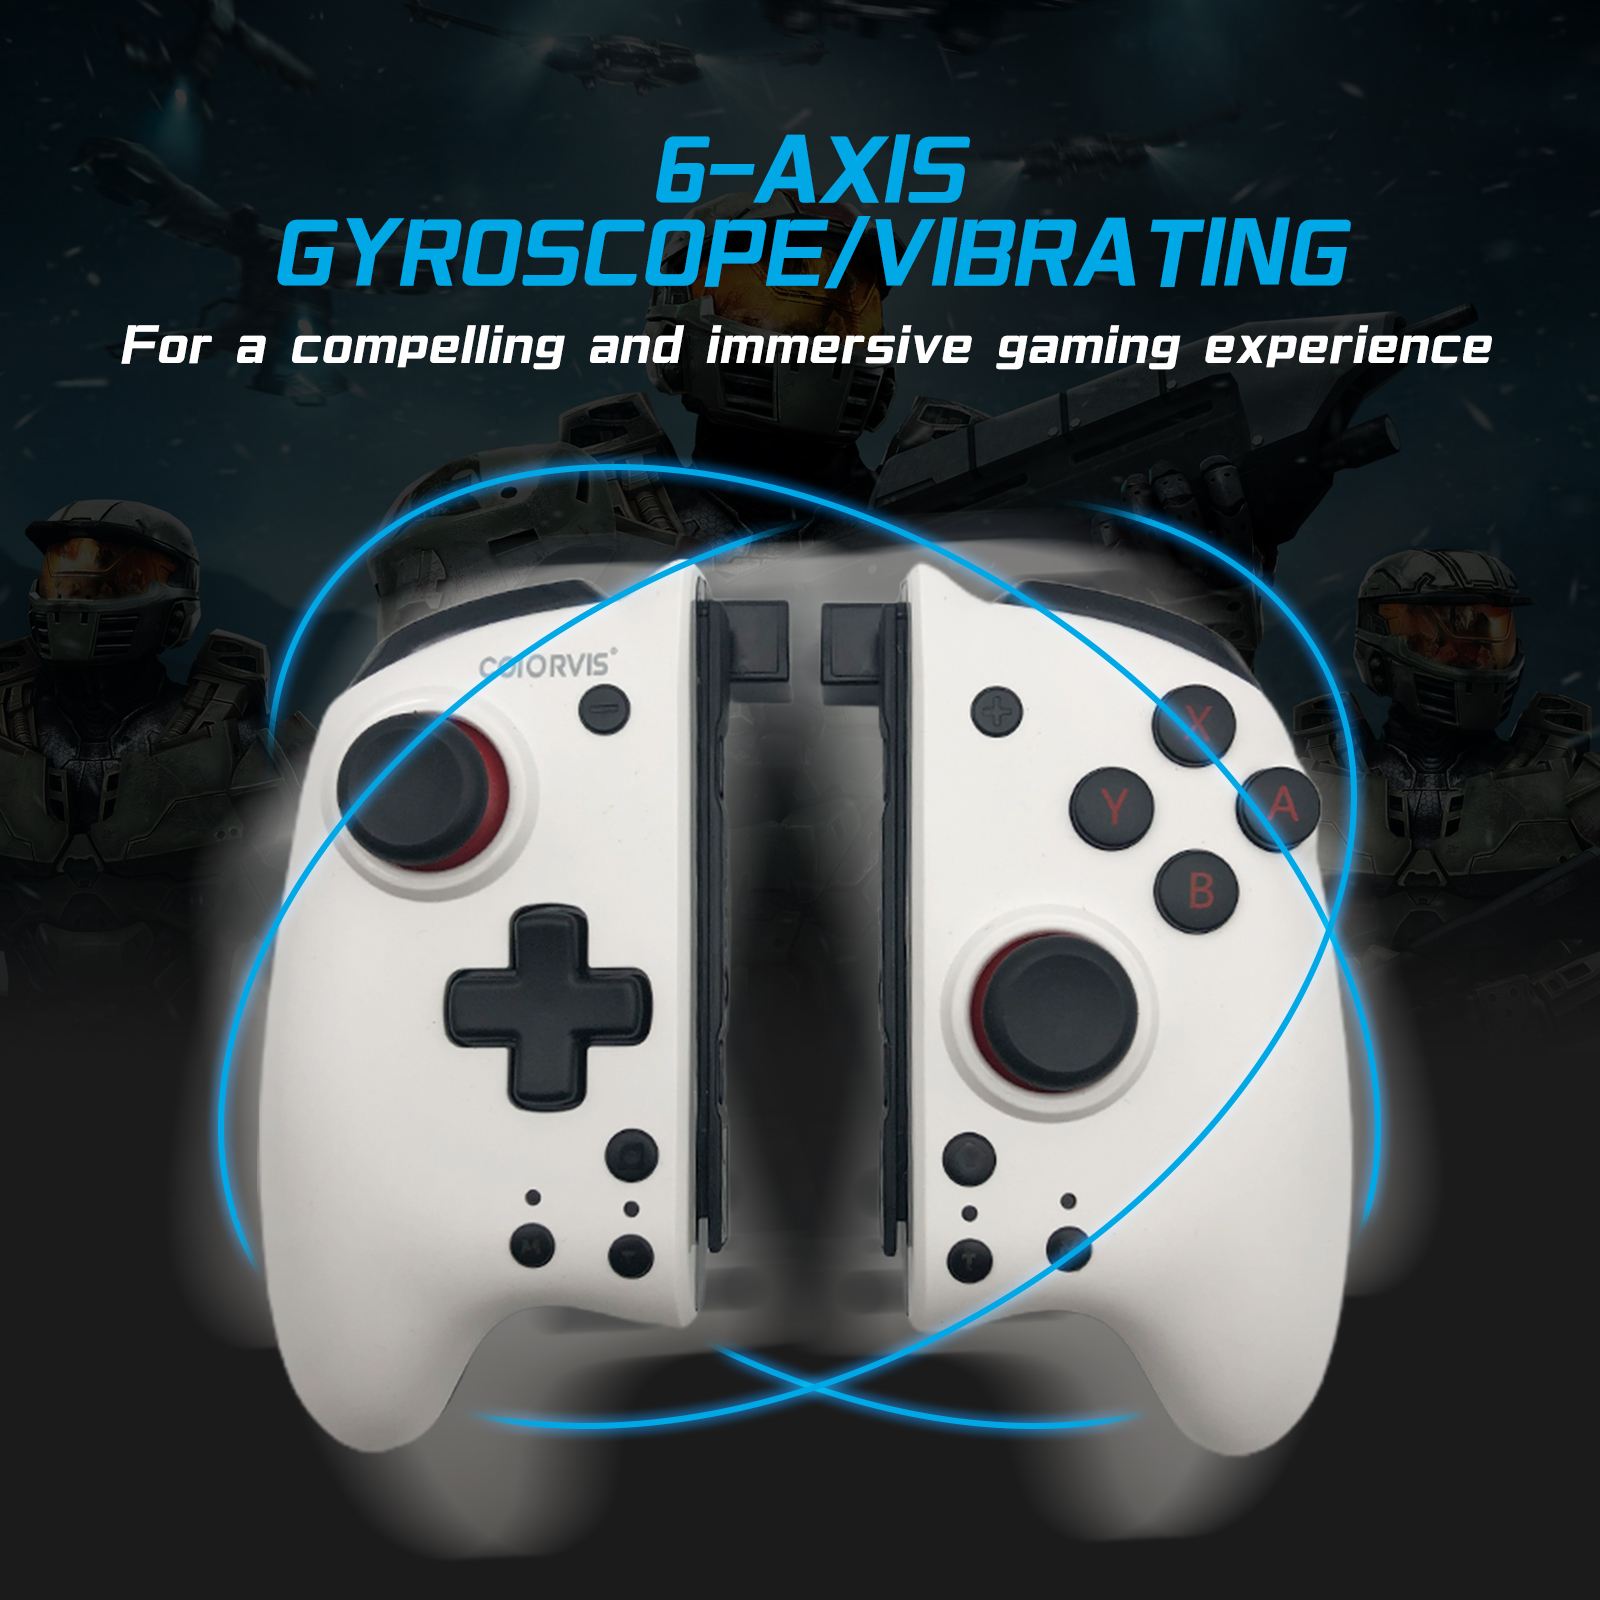 Six-axis gyroscope for a compelling and immersive gaming experience.